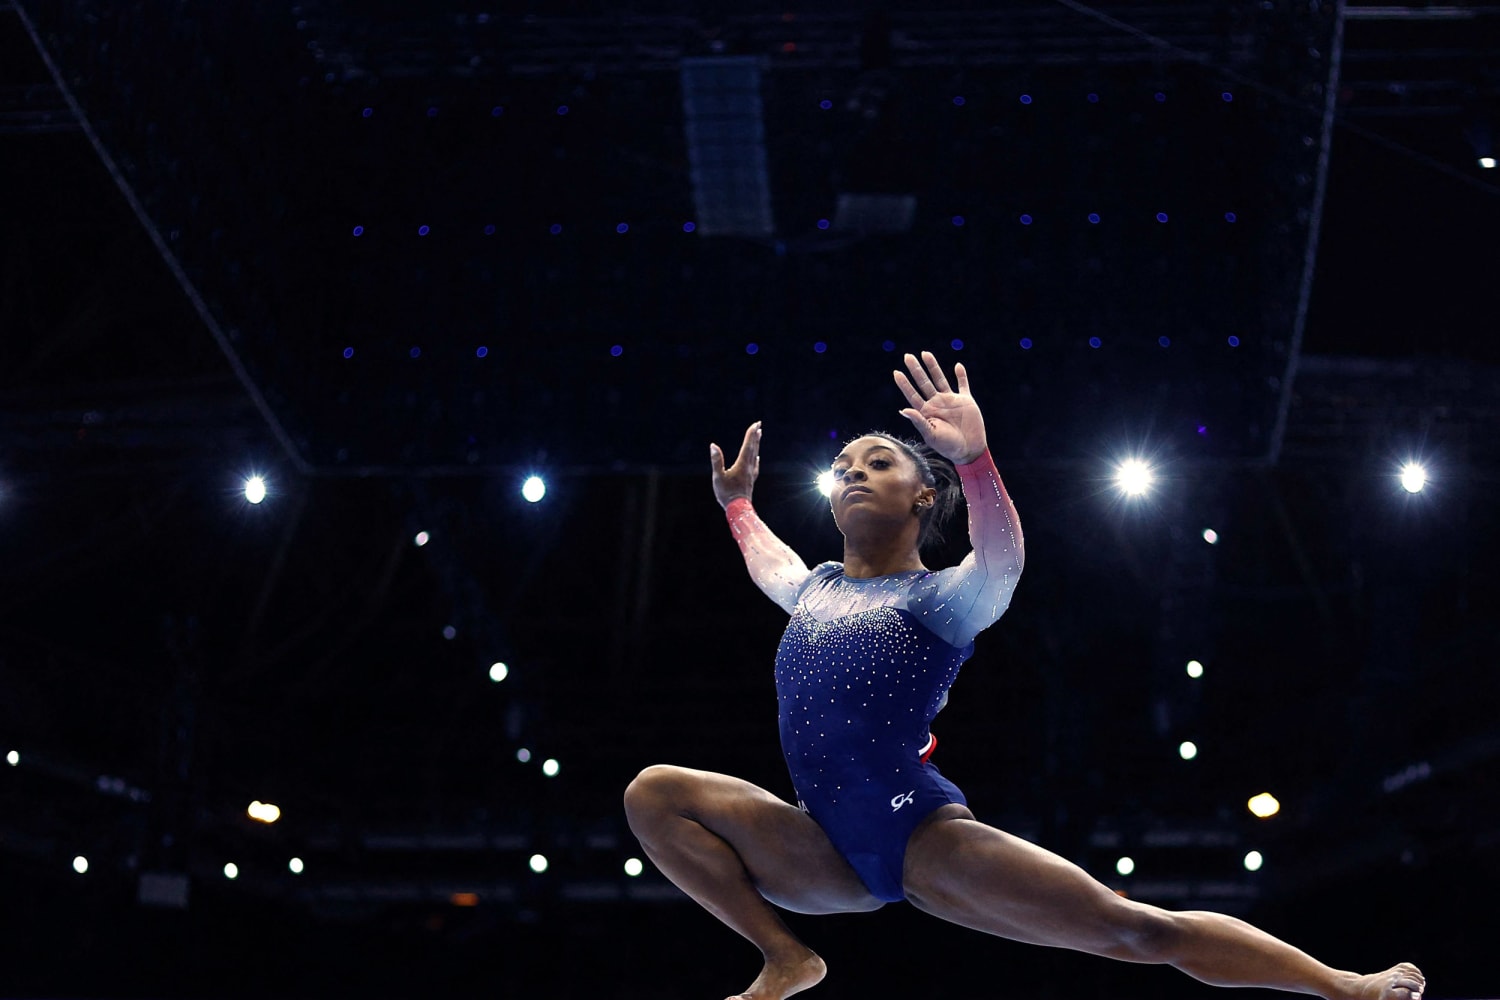 Simone Biles is a lock for the US Olympic team but who else will join her?